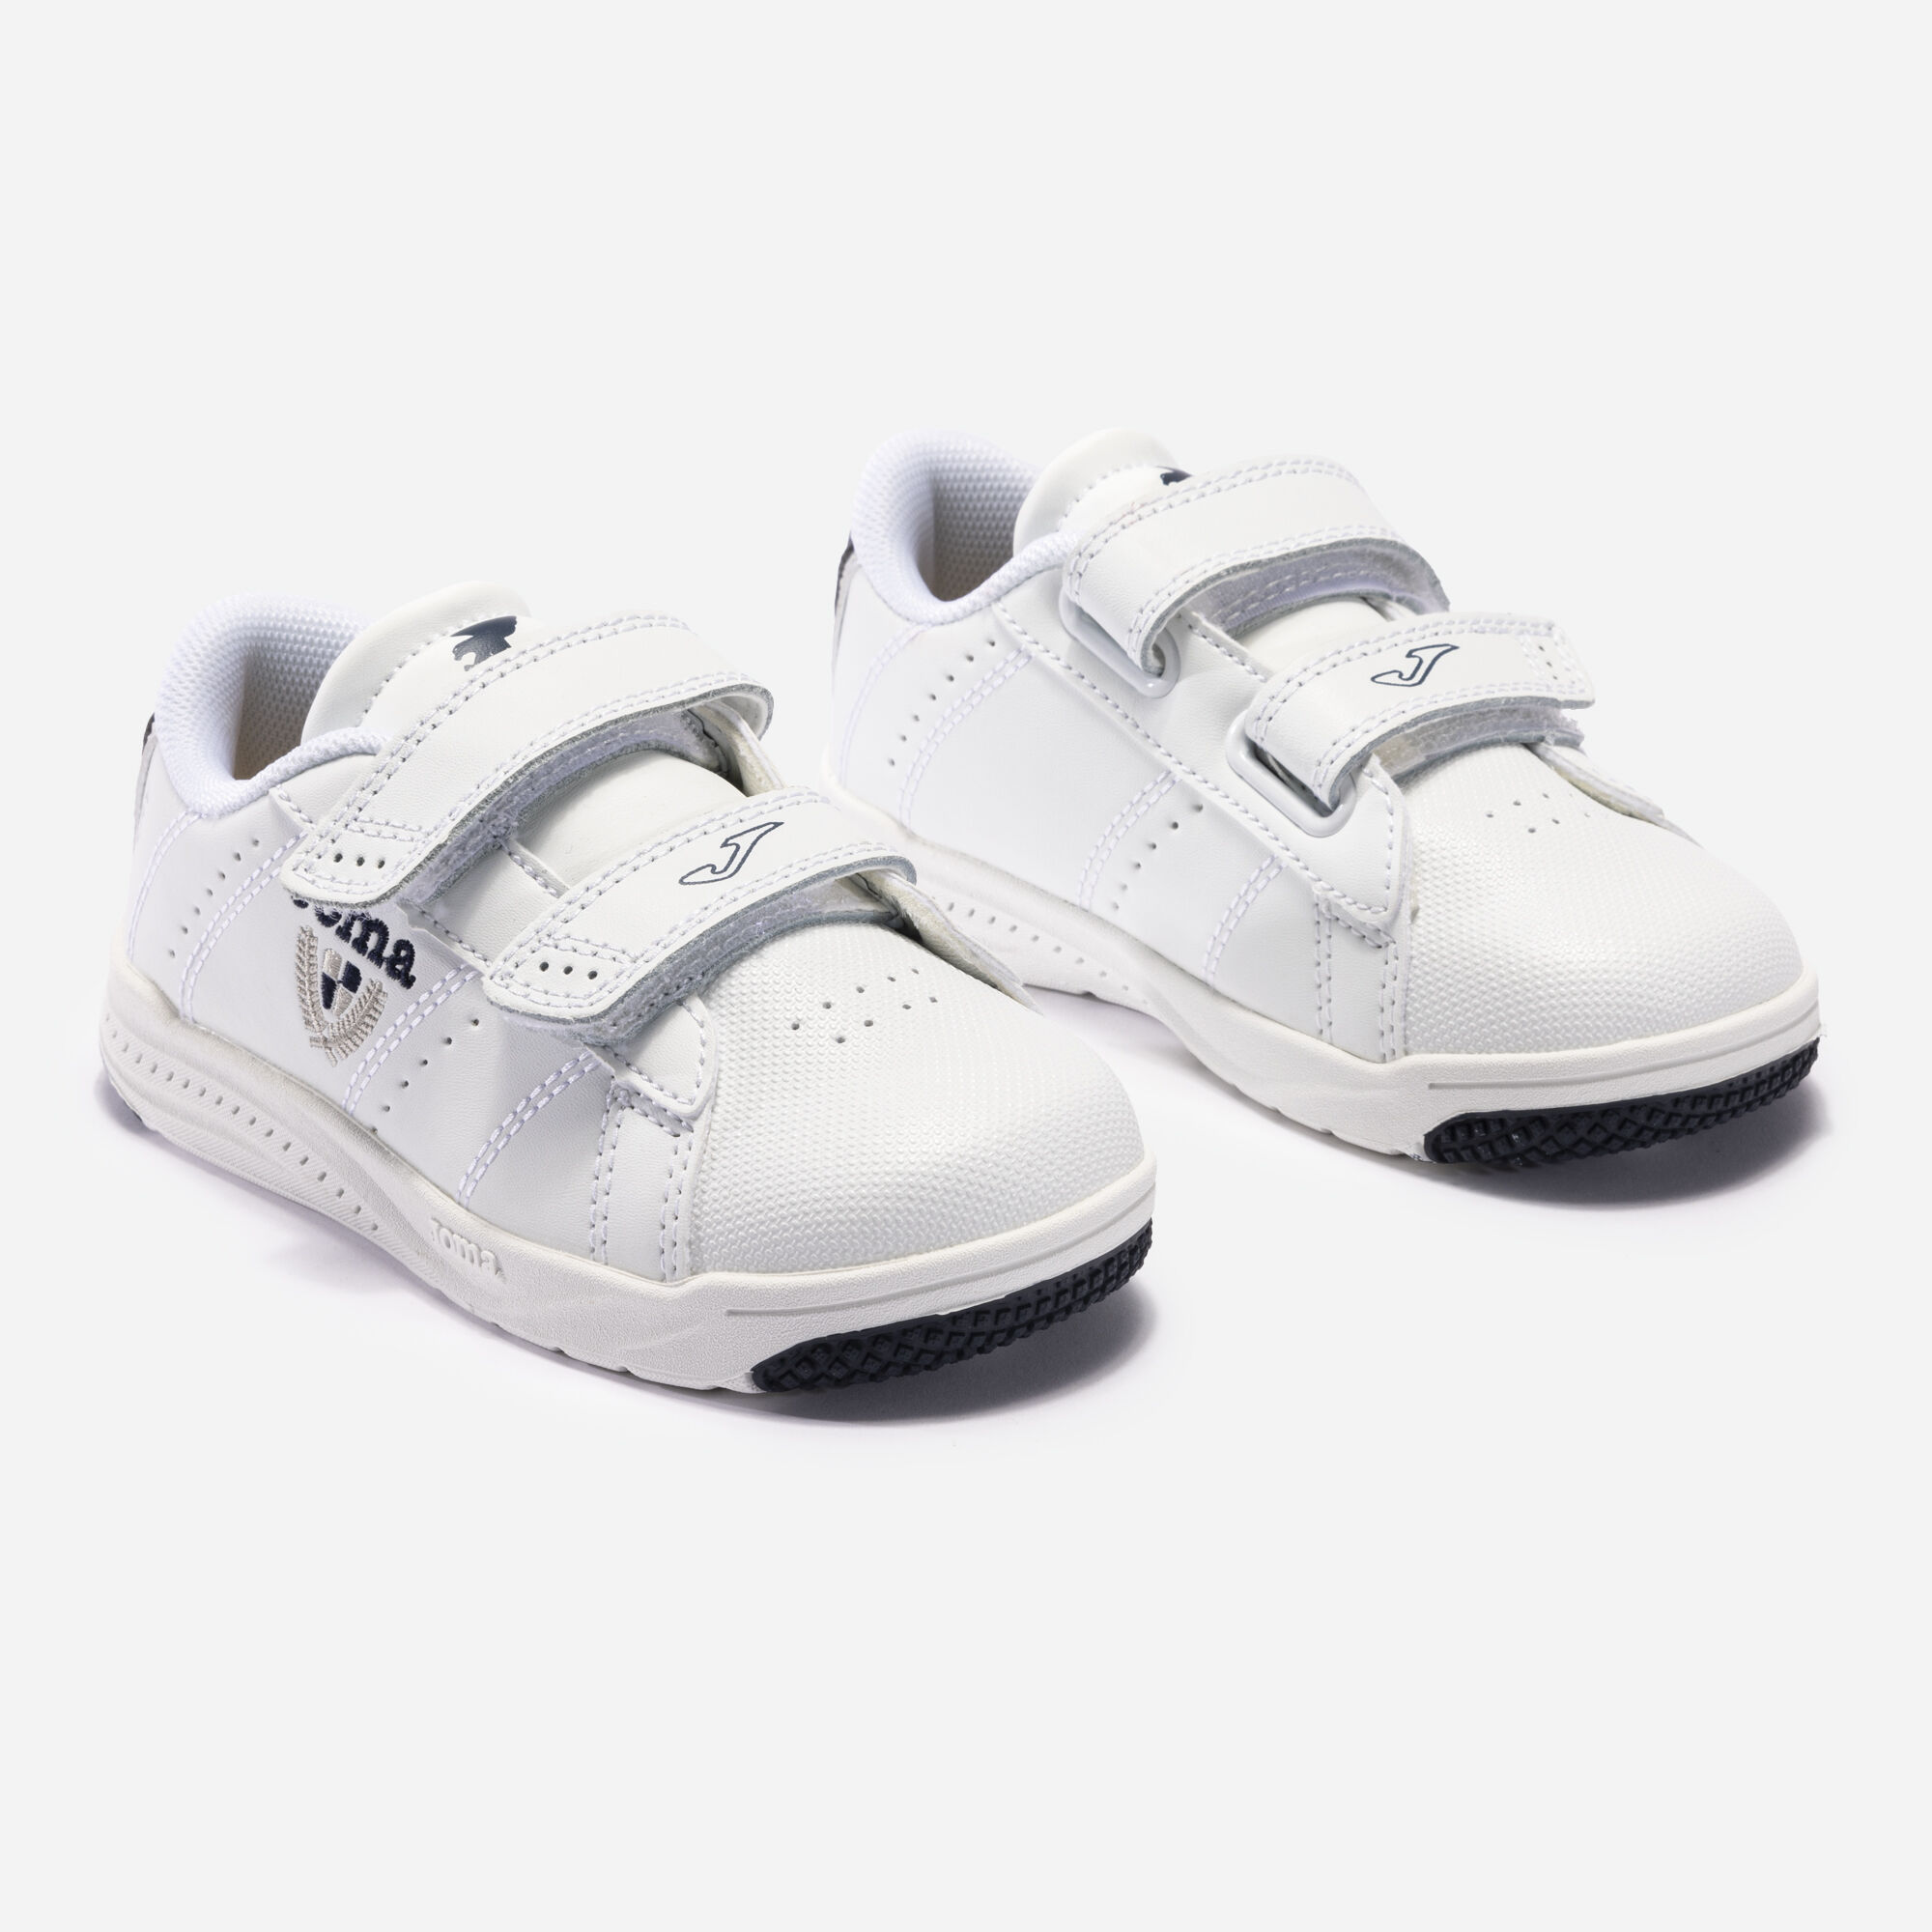 CASUAL SHOES PLAY 21 JUNIOR WHITE NAVY BLUE